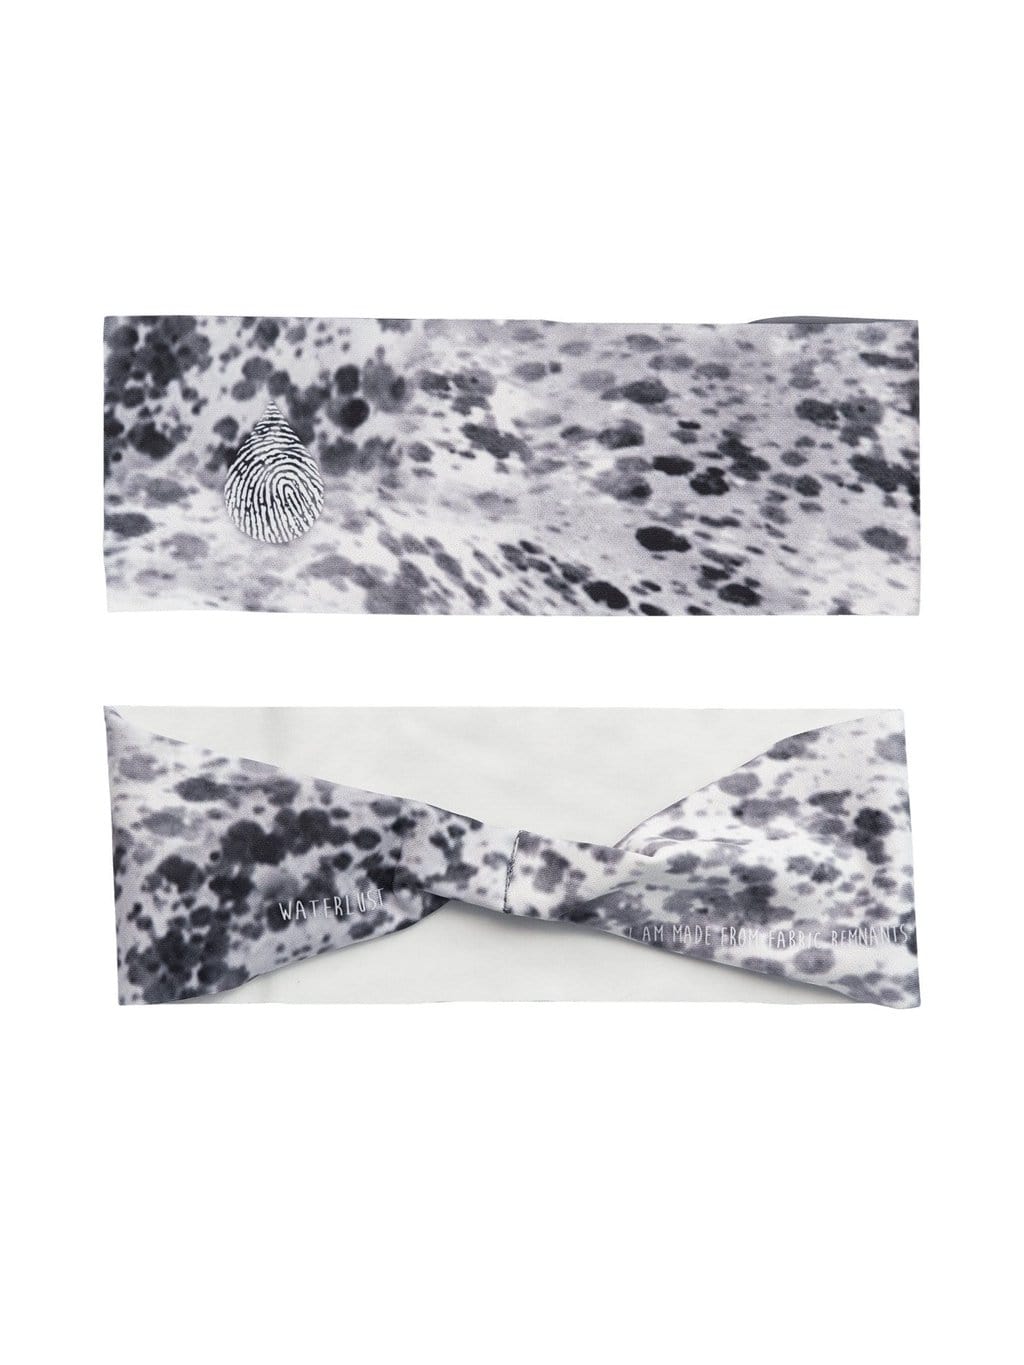 Waterlust Printed Headband Made From Pre-Consumer Waste